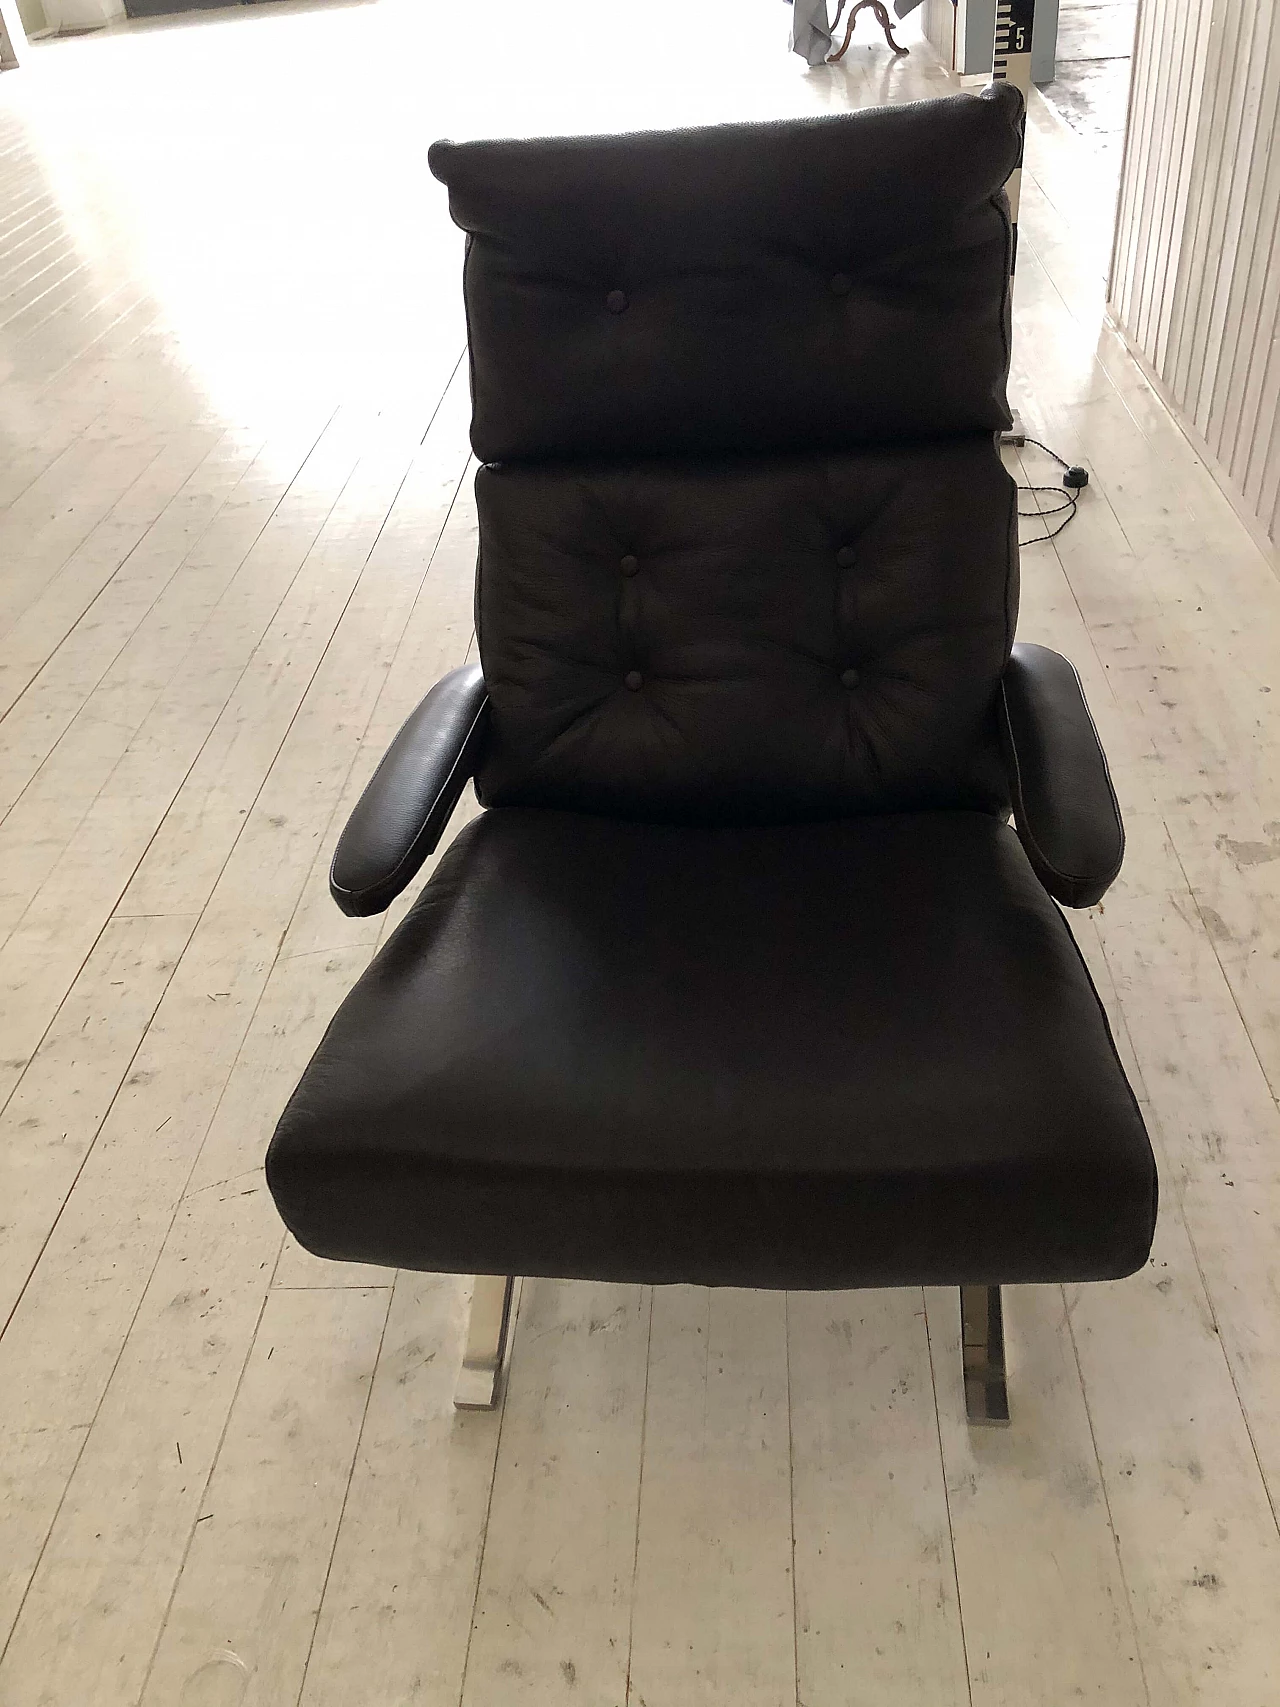 Black leather and steel tilting armchair, early 2000s 1284072